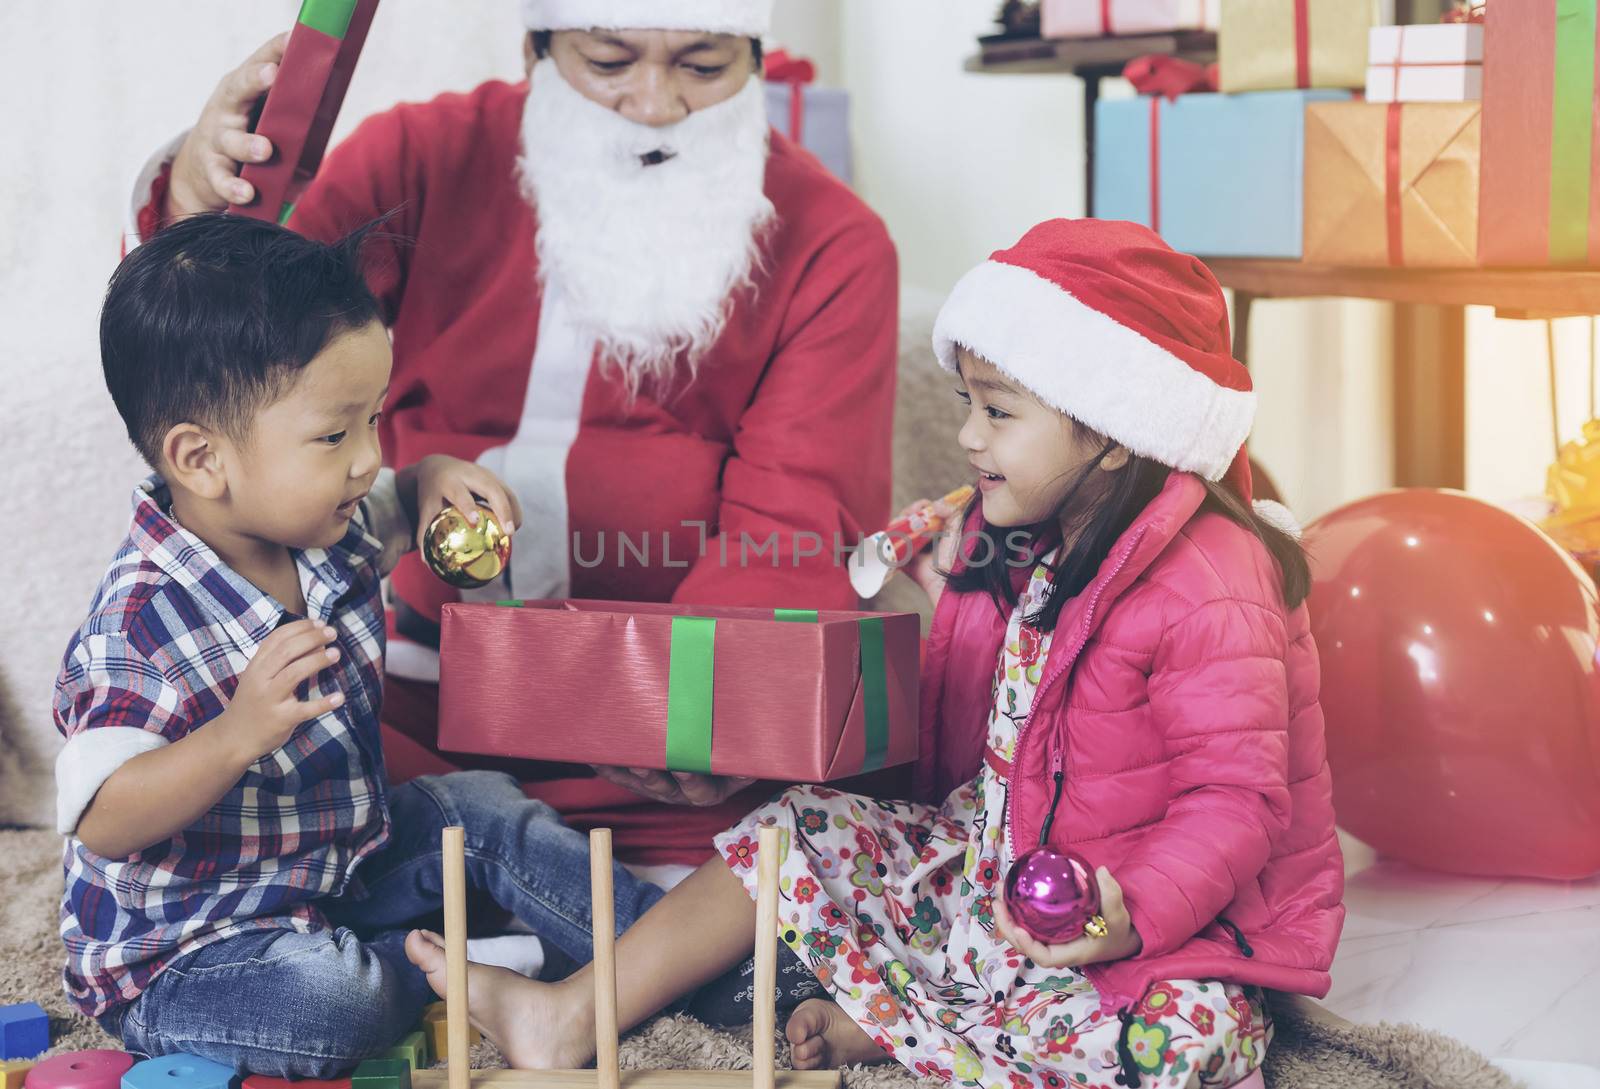 Santa Claus gives gifts and reads fairy tales to boys and girls listening in the festive season.